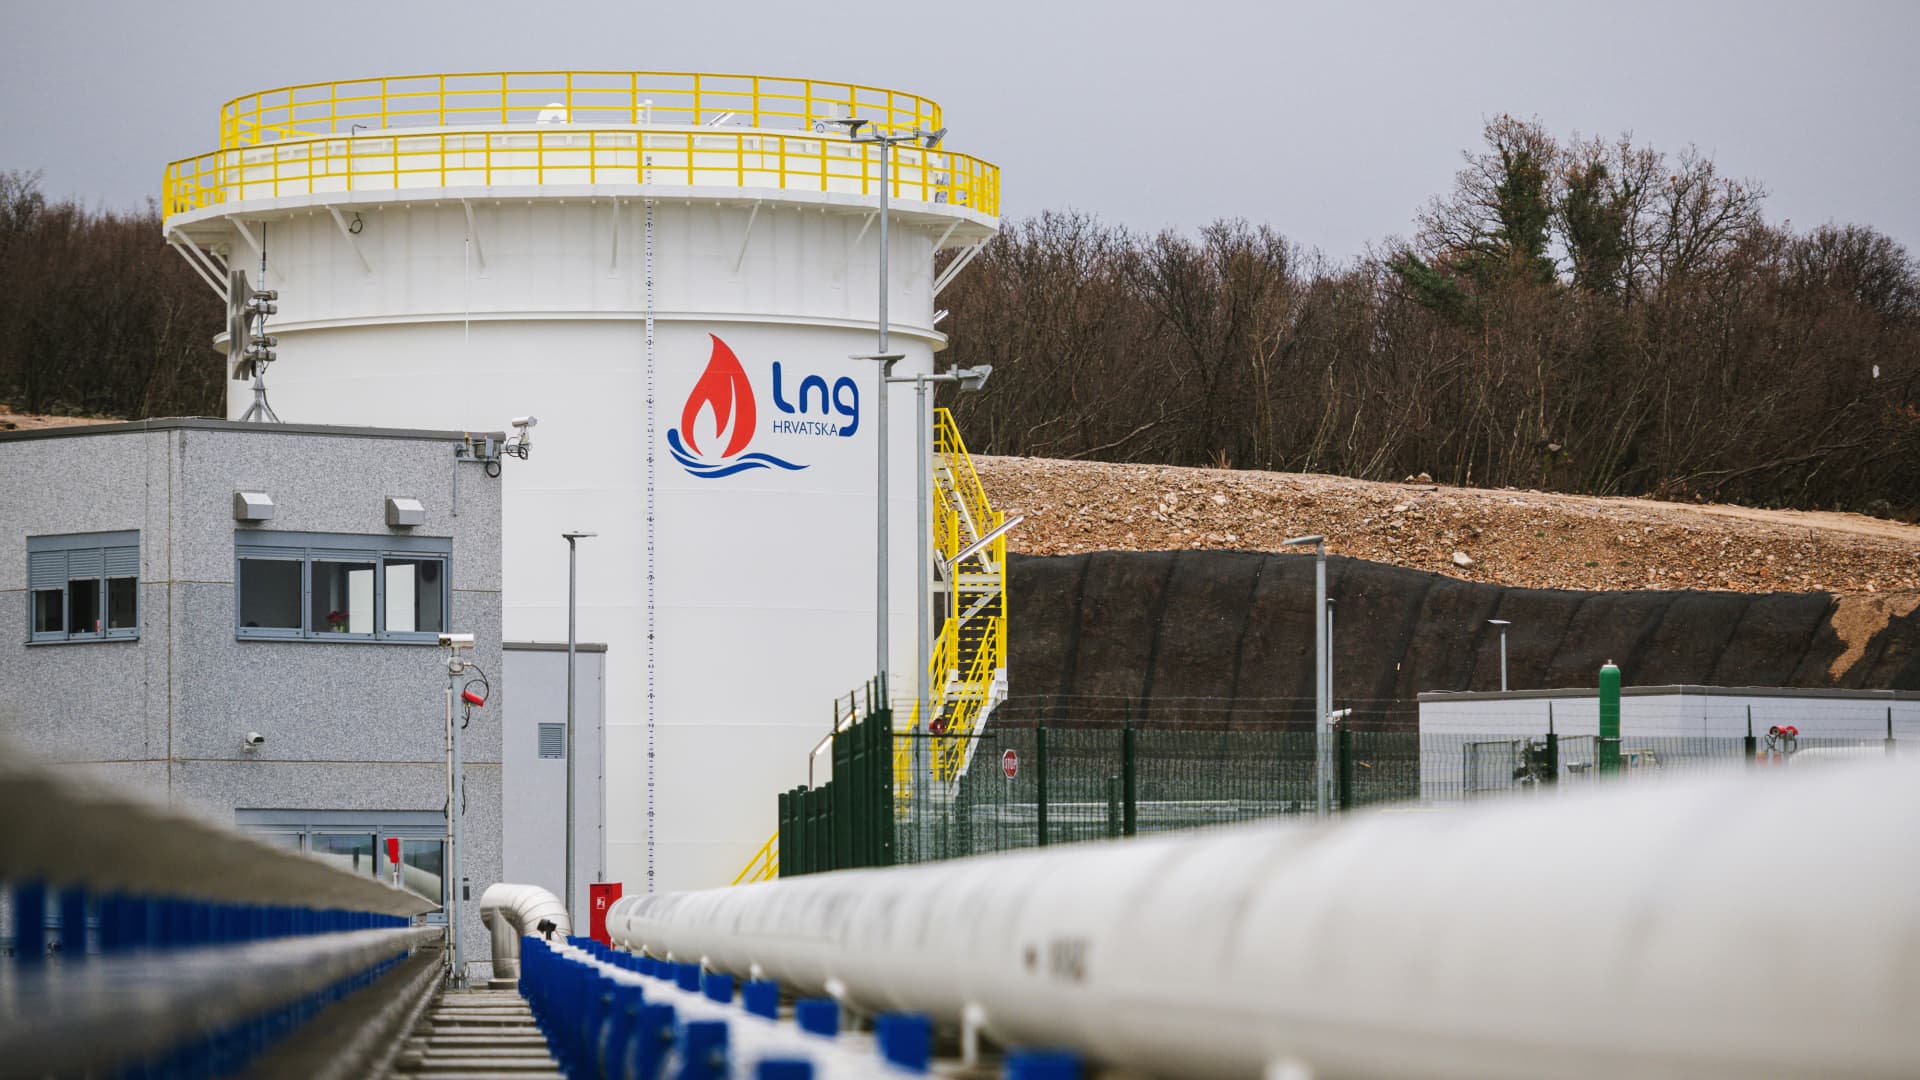 Natural gas surges to highest level since 2008 as Russia’s war upends energy markets – CNBC